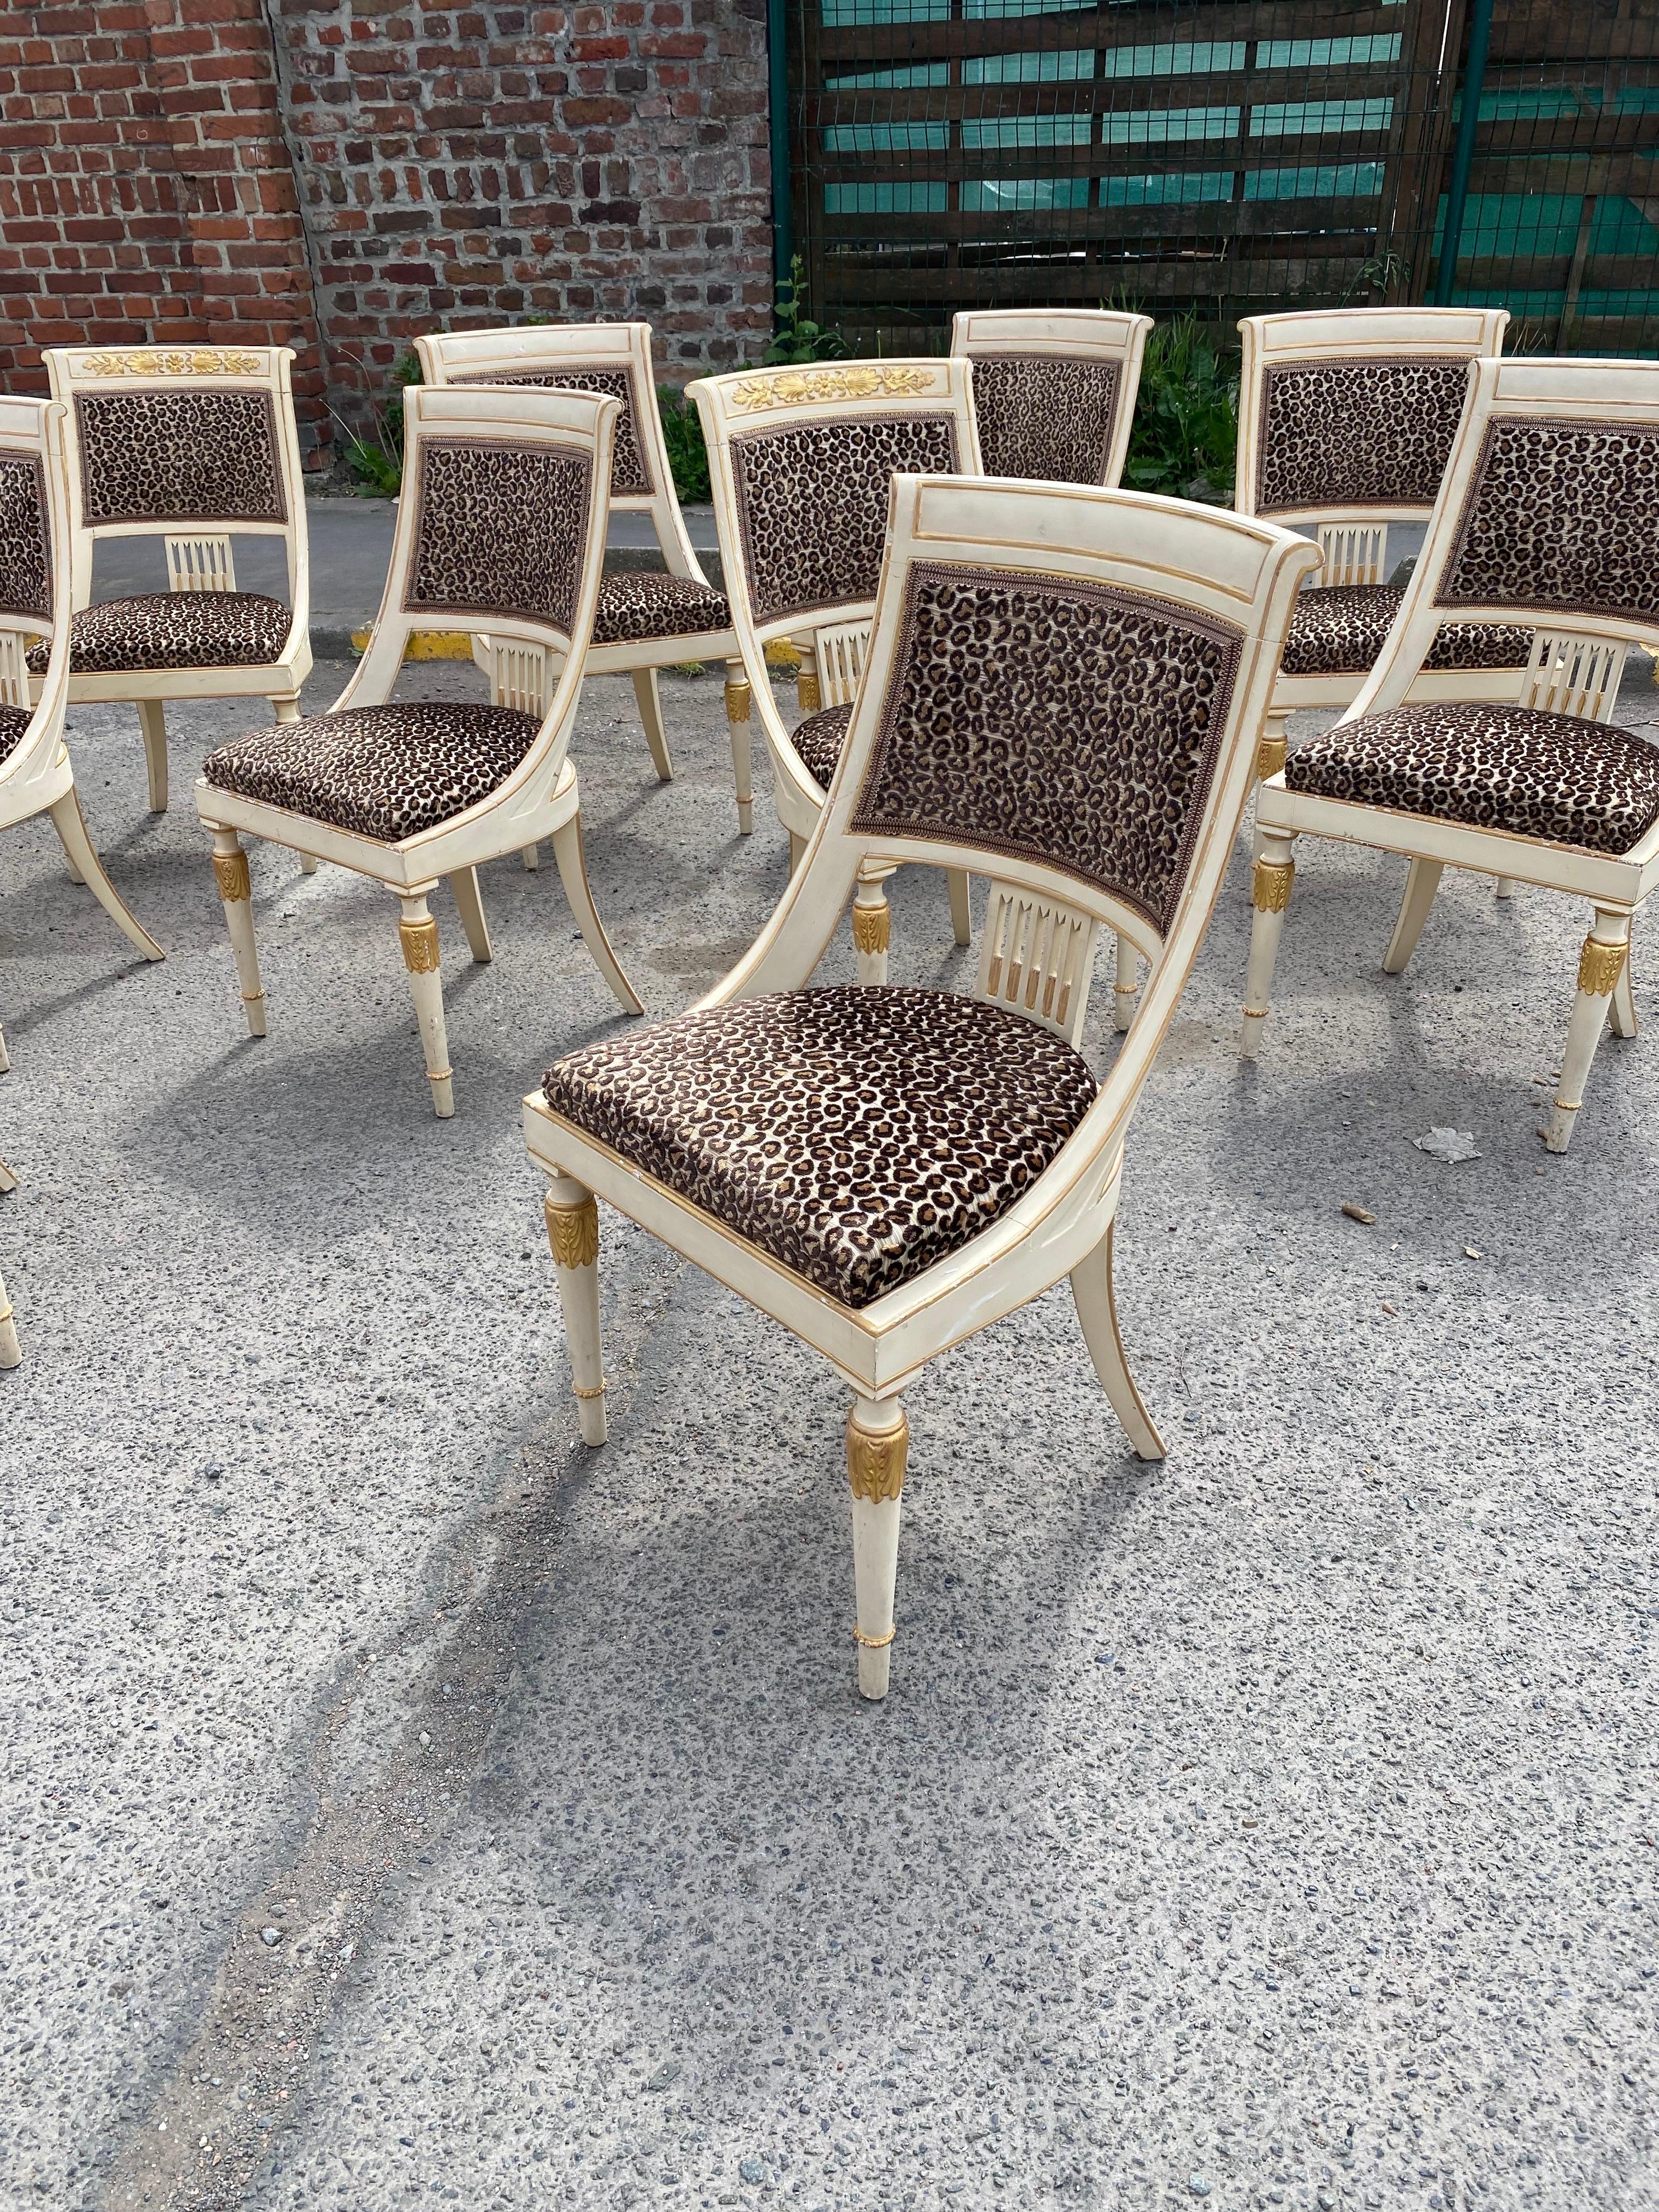 Suite of 12 Empire style chairs circa 1960/1970
in the style of Maison Romeo in Paris;
2 chairs have a golden frieze at the top of the backrest;
small paint chips, some fabric is a little 